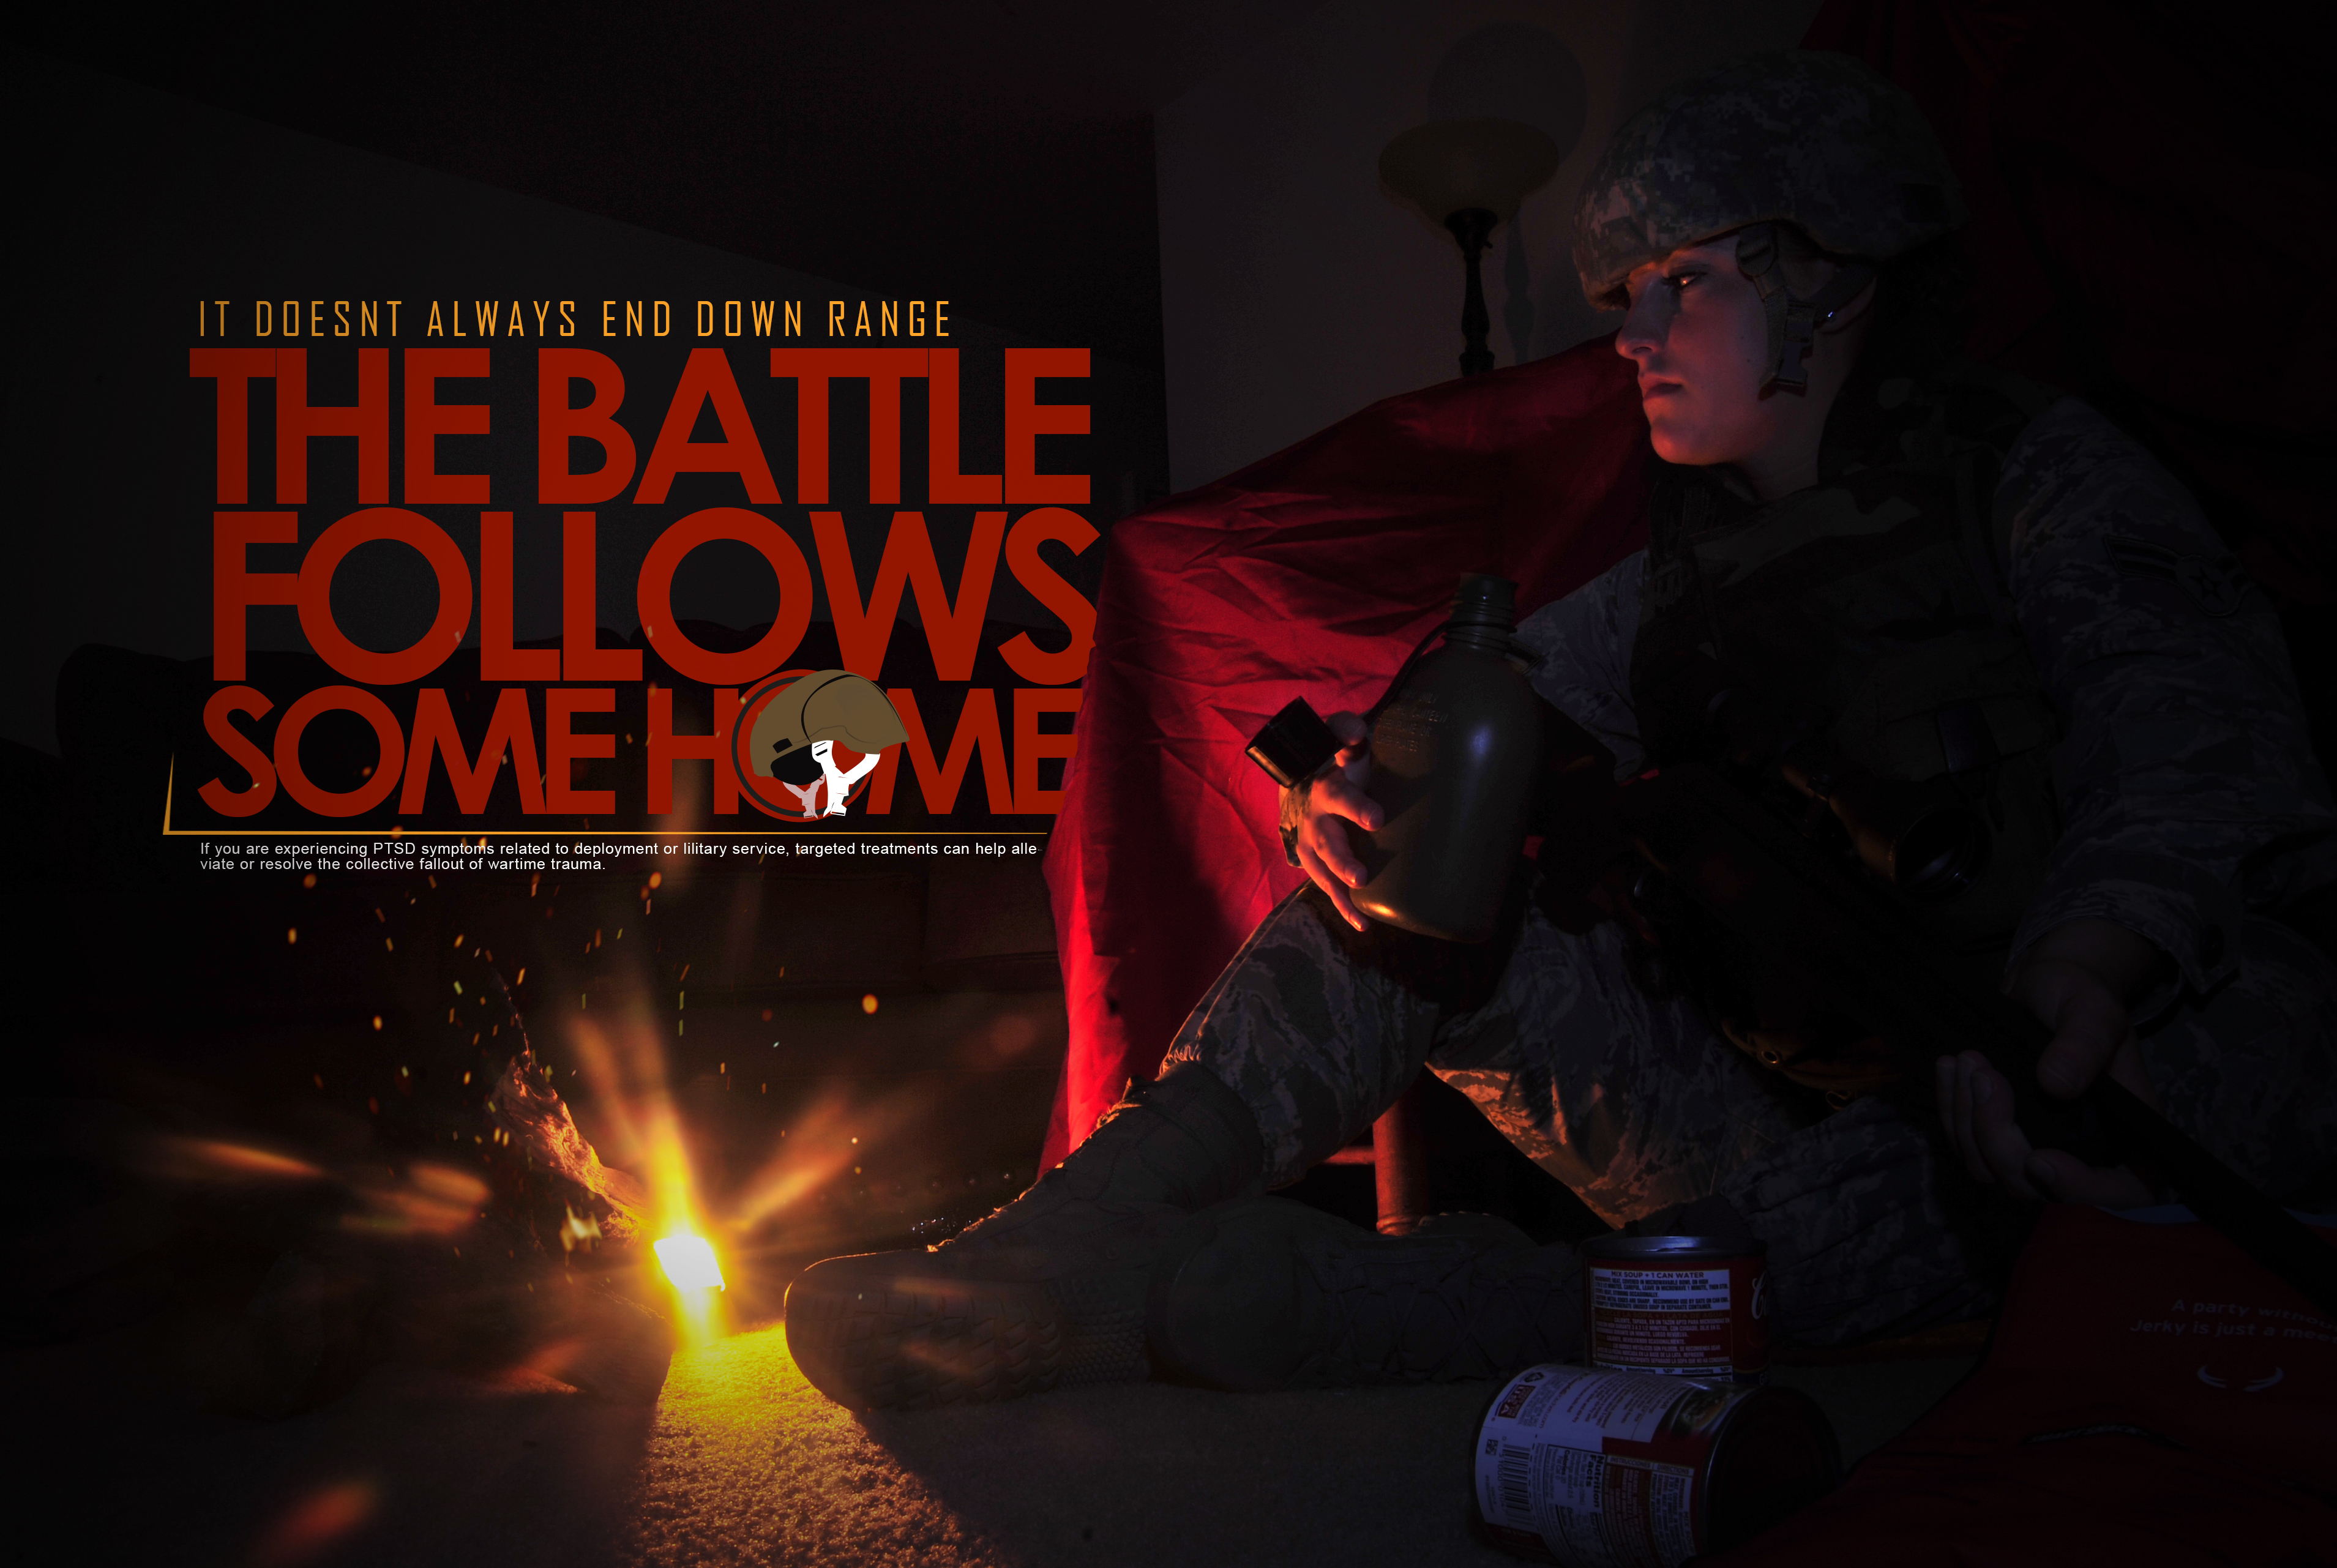 It Doesnt Always End Down Range. The Battle Follows Some Home. If you are experiencing PTSD symptoms related to deployment or military service, targeted treatments can help alleviate or resolve the collective fallout of wartime trauma.